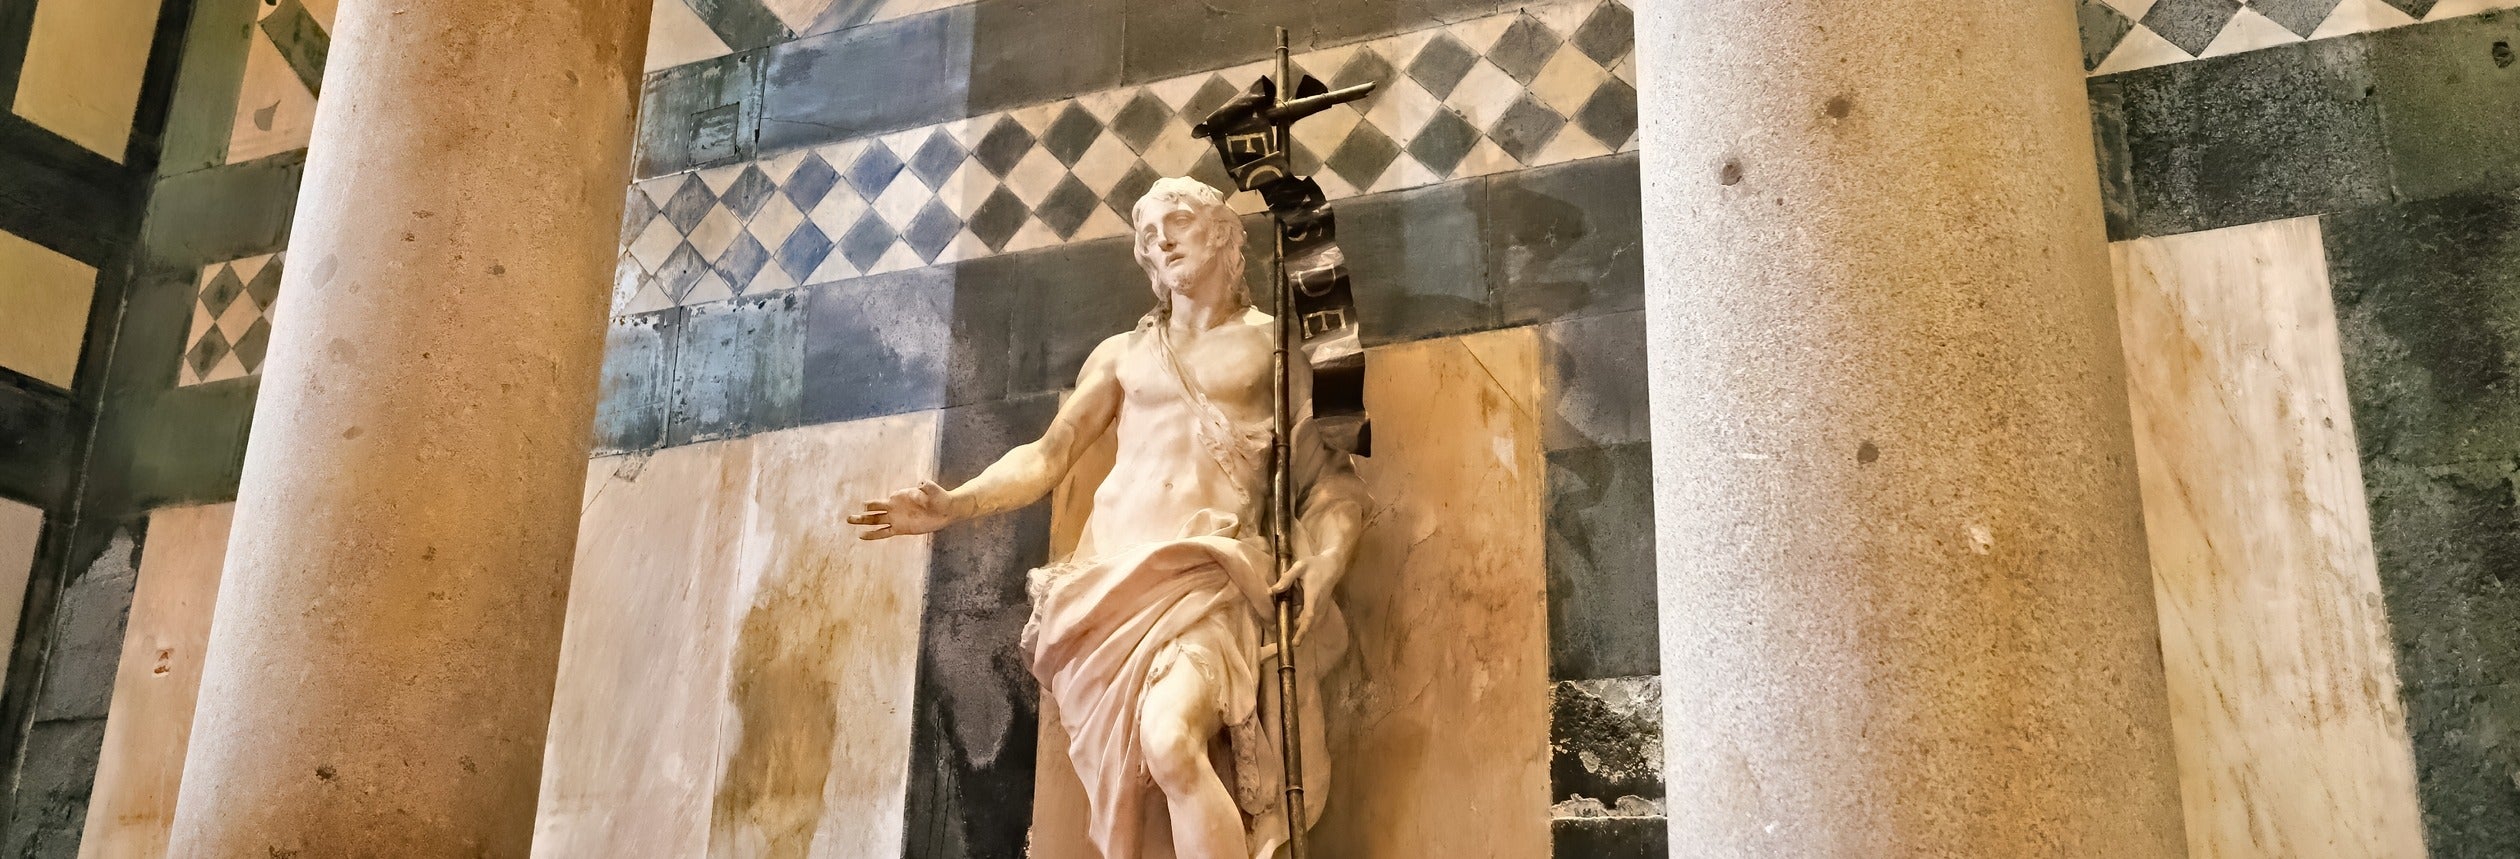 Baptistery & Duomo Museum Tour + Giotto's Bell Tower